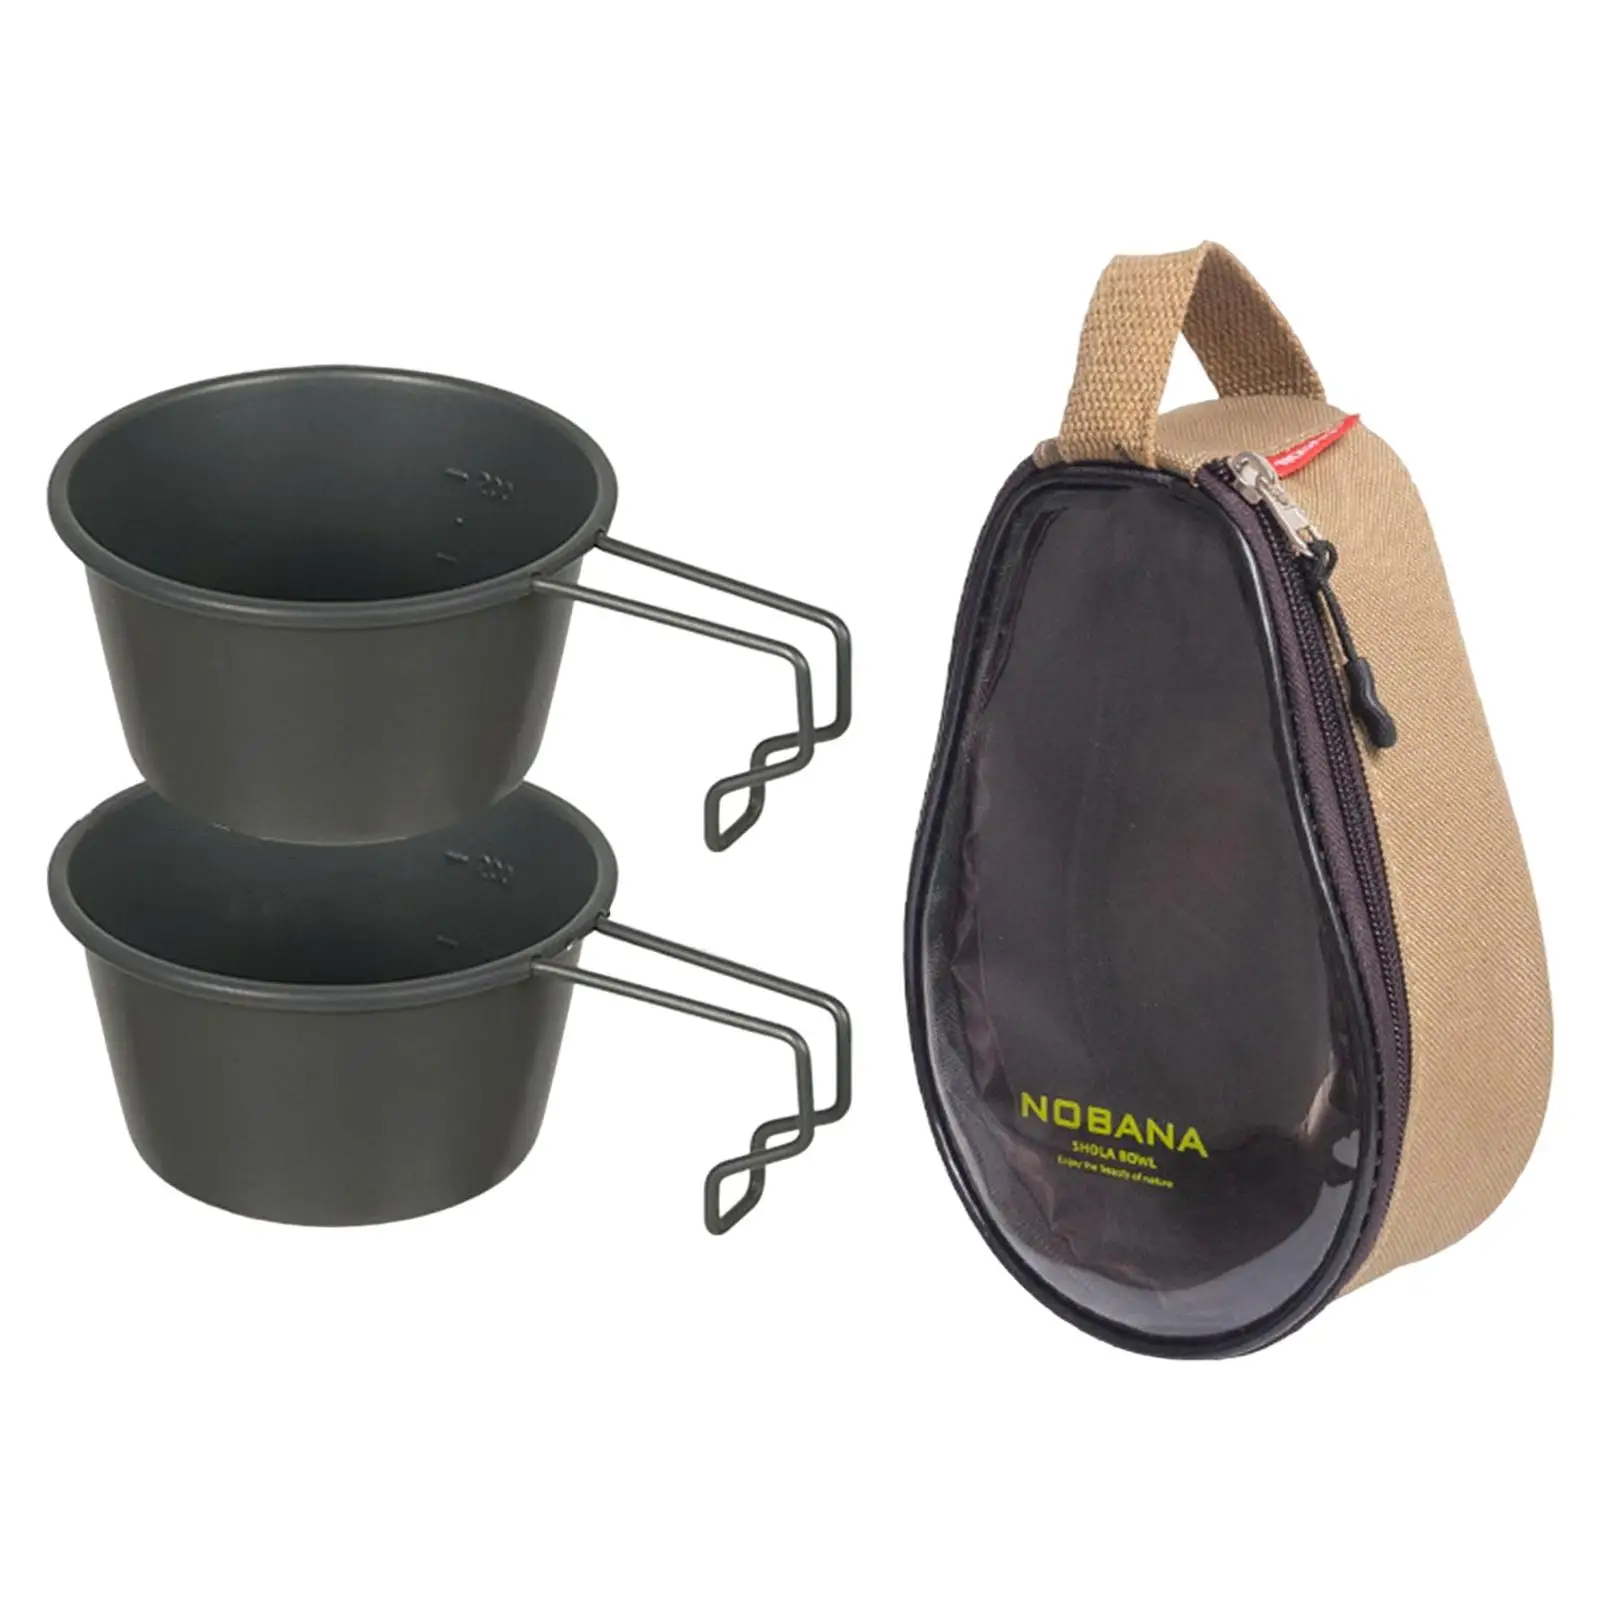 3pcs Outdoor Stainless Steel Bowl Picnic Tableware Barbecue Hiking Camping Cup Picnic Cookware Storage Bag